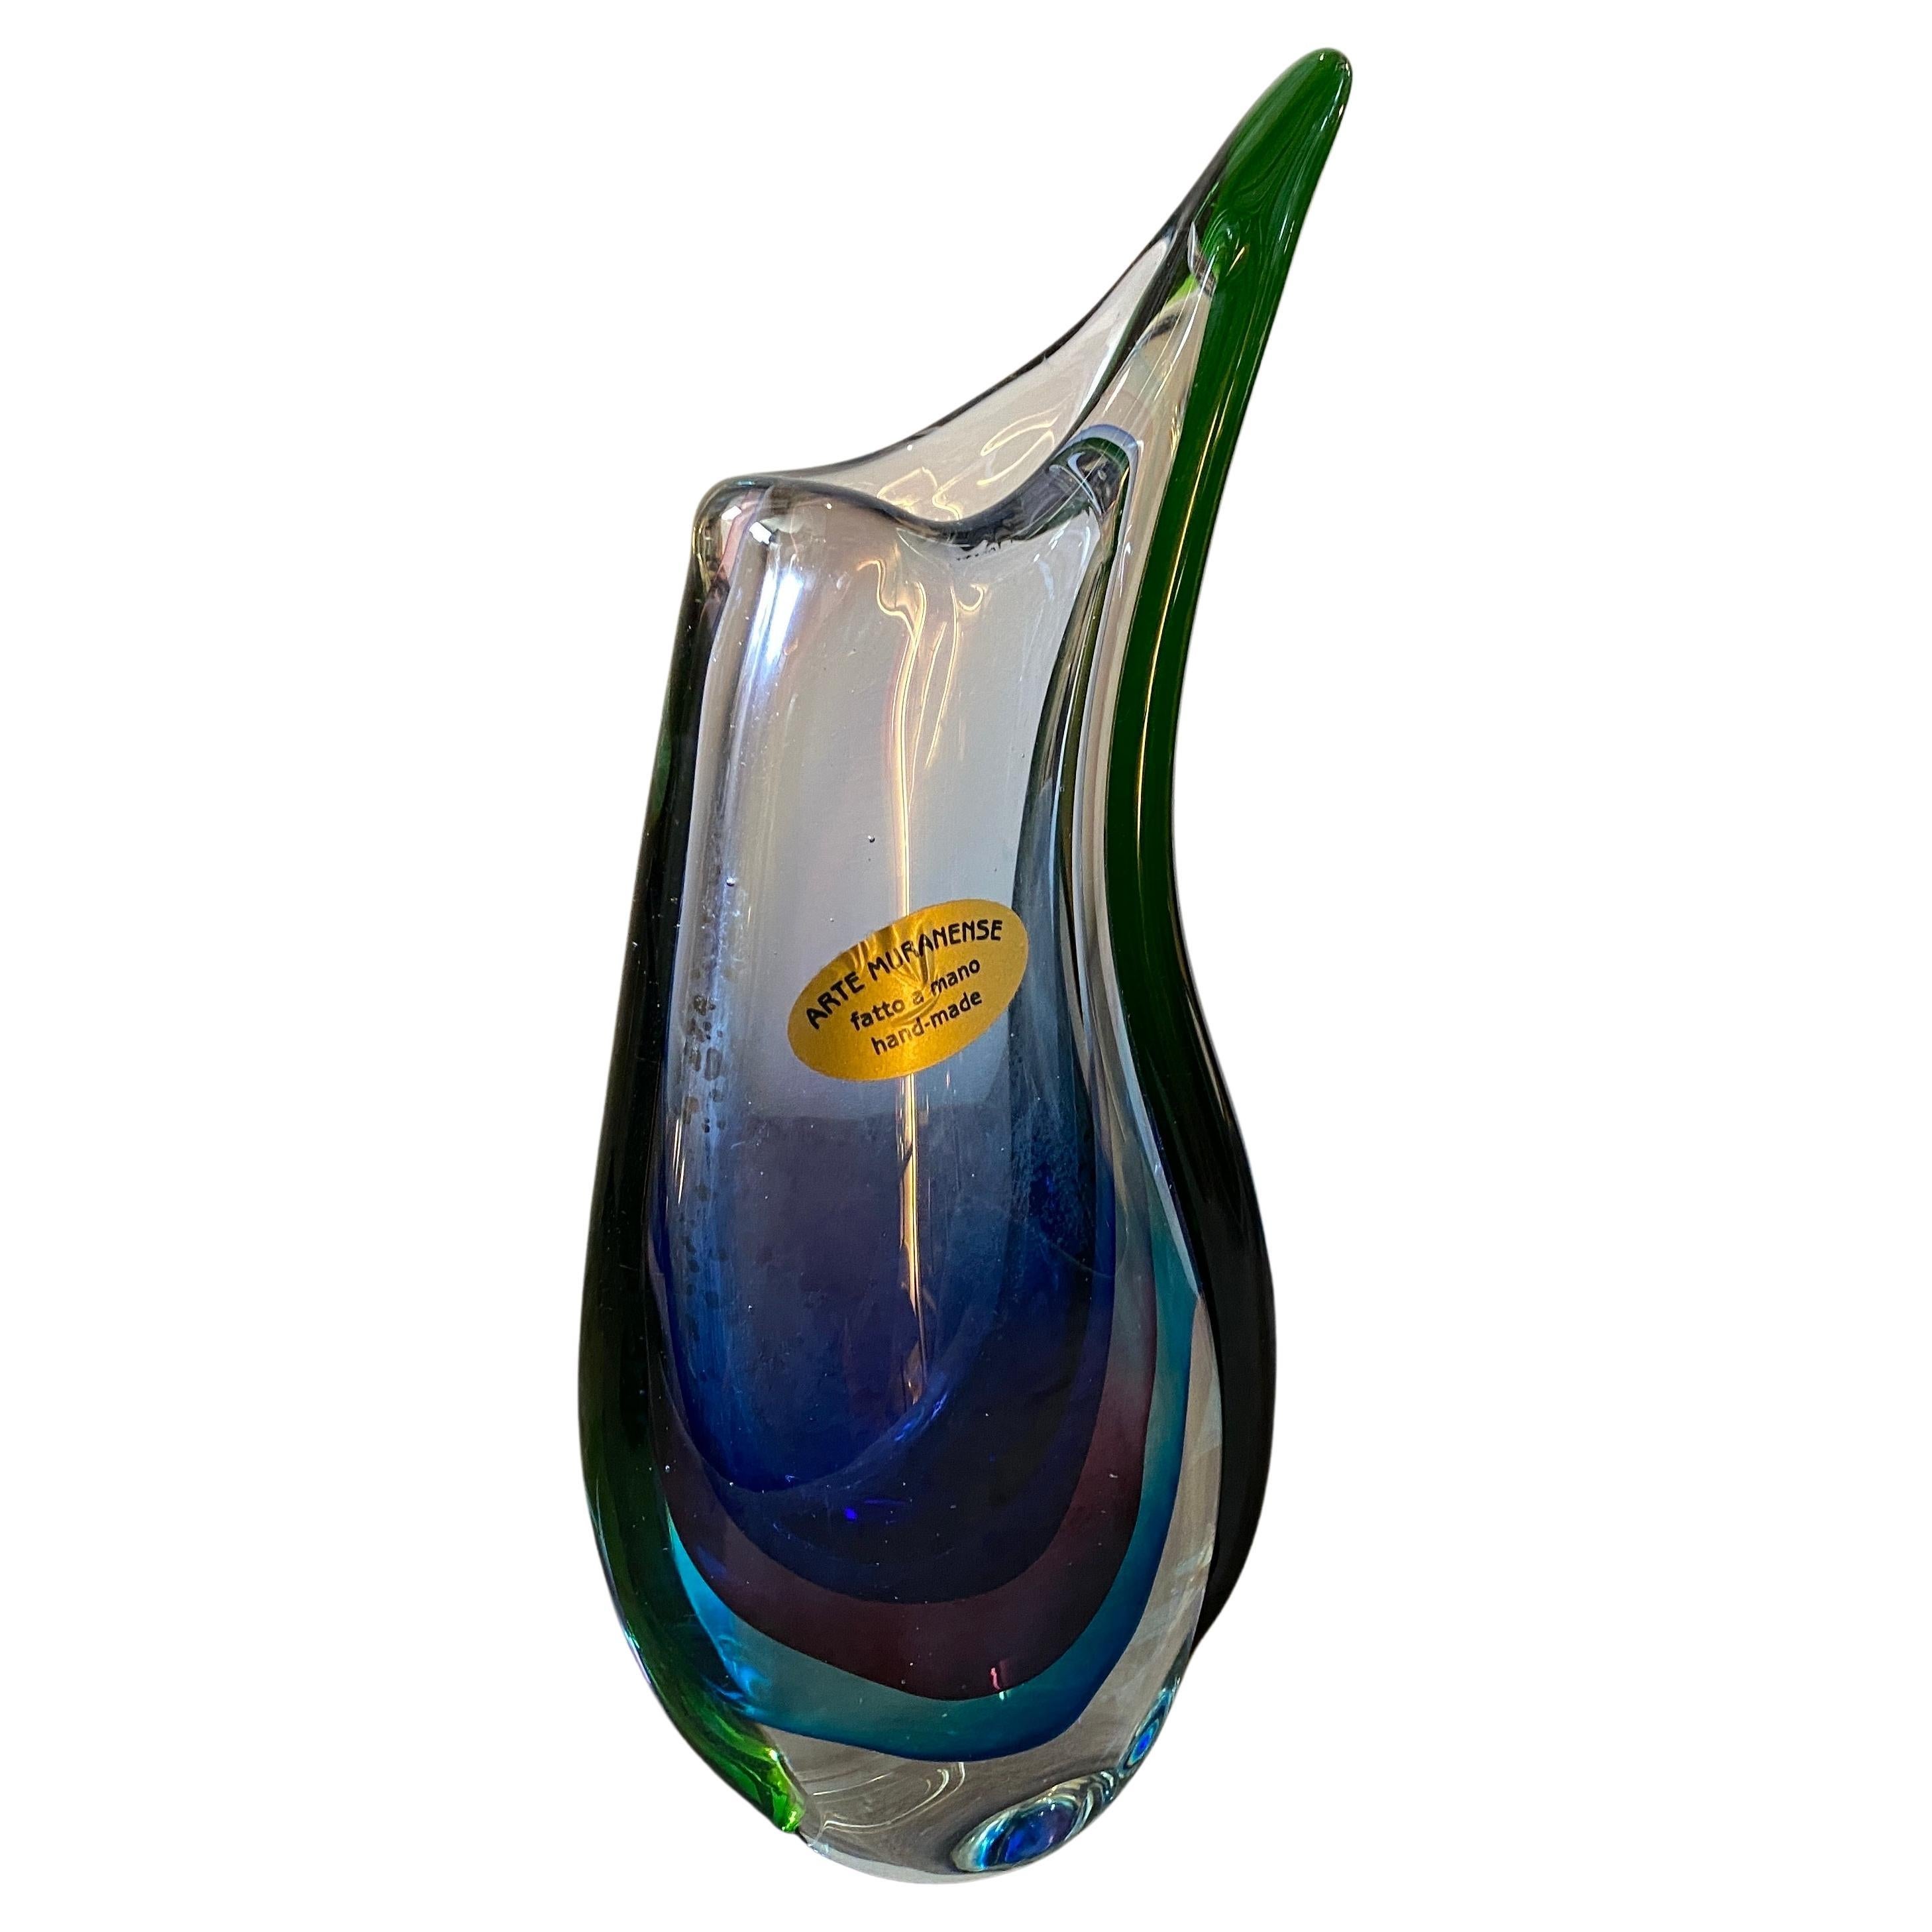 A blue, green and purple murano glass vase designed and manufactured in Italy in the Eighties by Vincenzo Nason, its acid signed on the bottom and labeled on a side. The vase it's in perfect condition the sommerso technique, It is a decorative